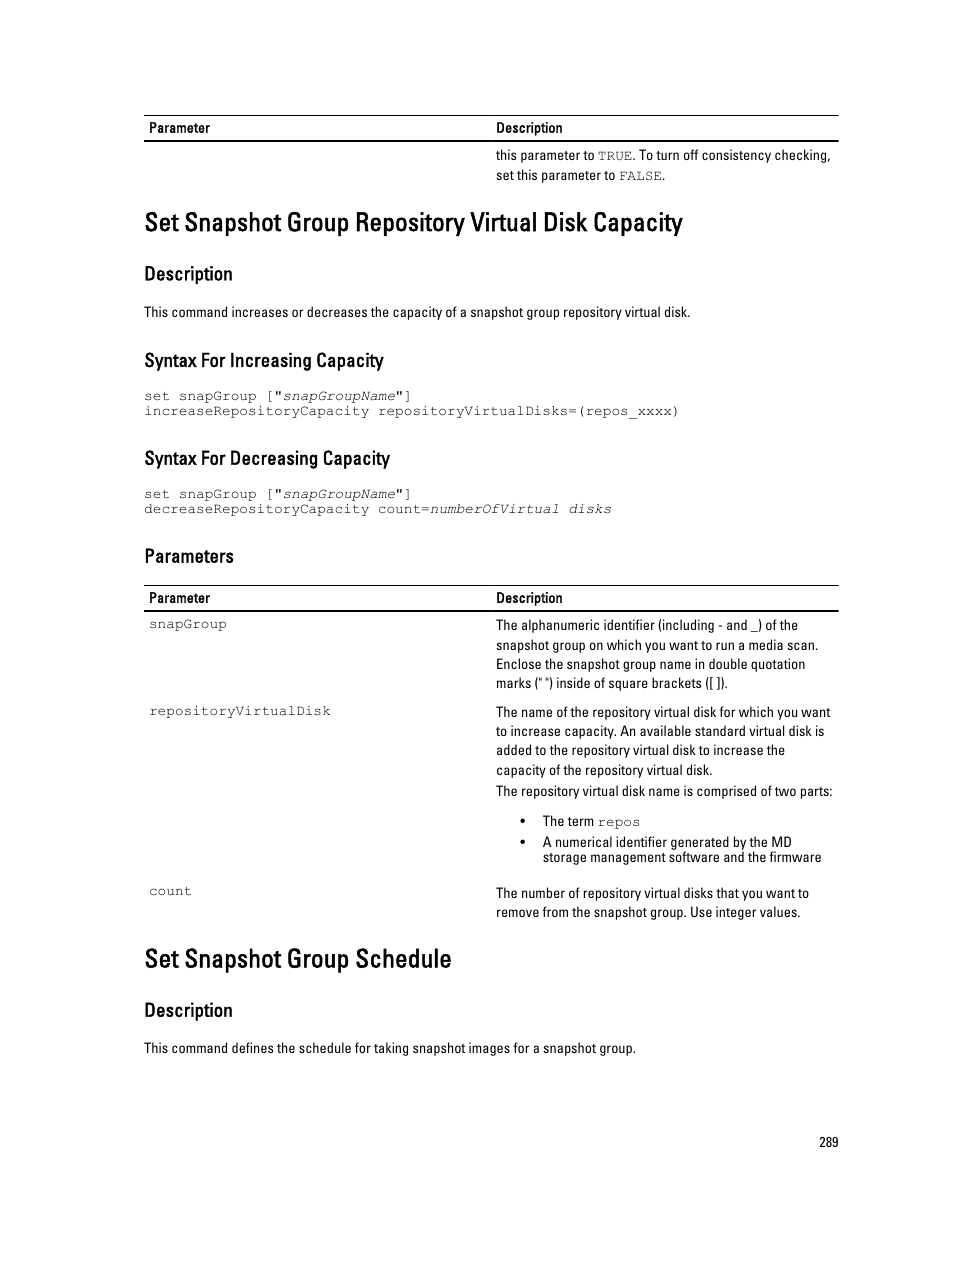 Set snapshot group schedule | Dell PowerVault MD3260i User Manual | Page 289 / 388